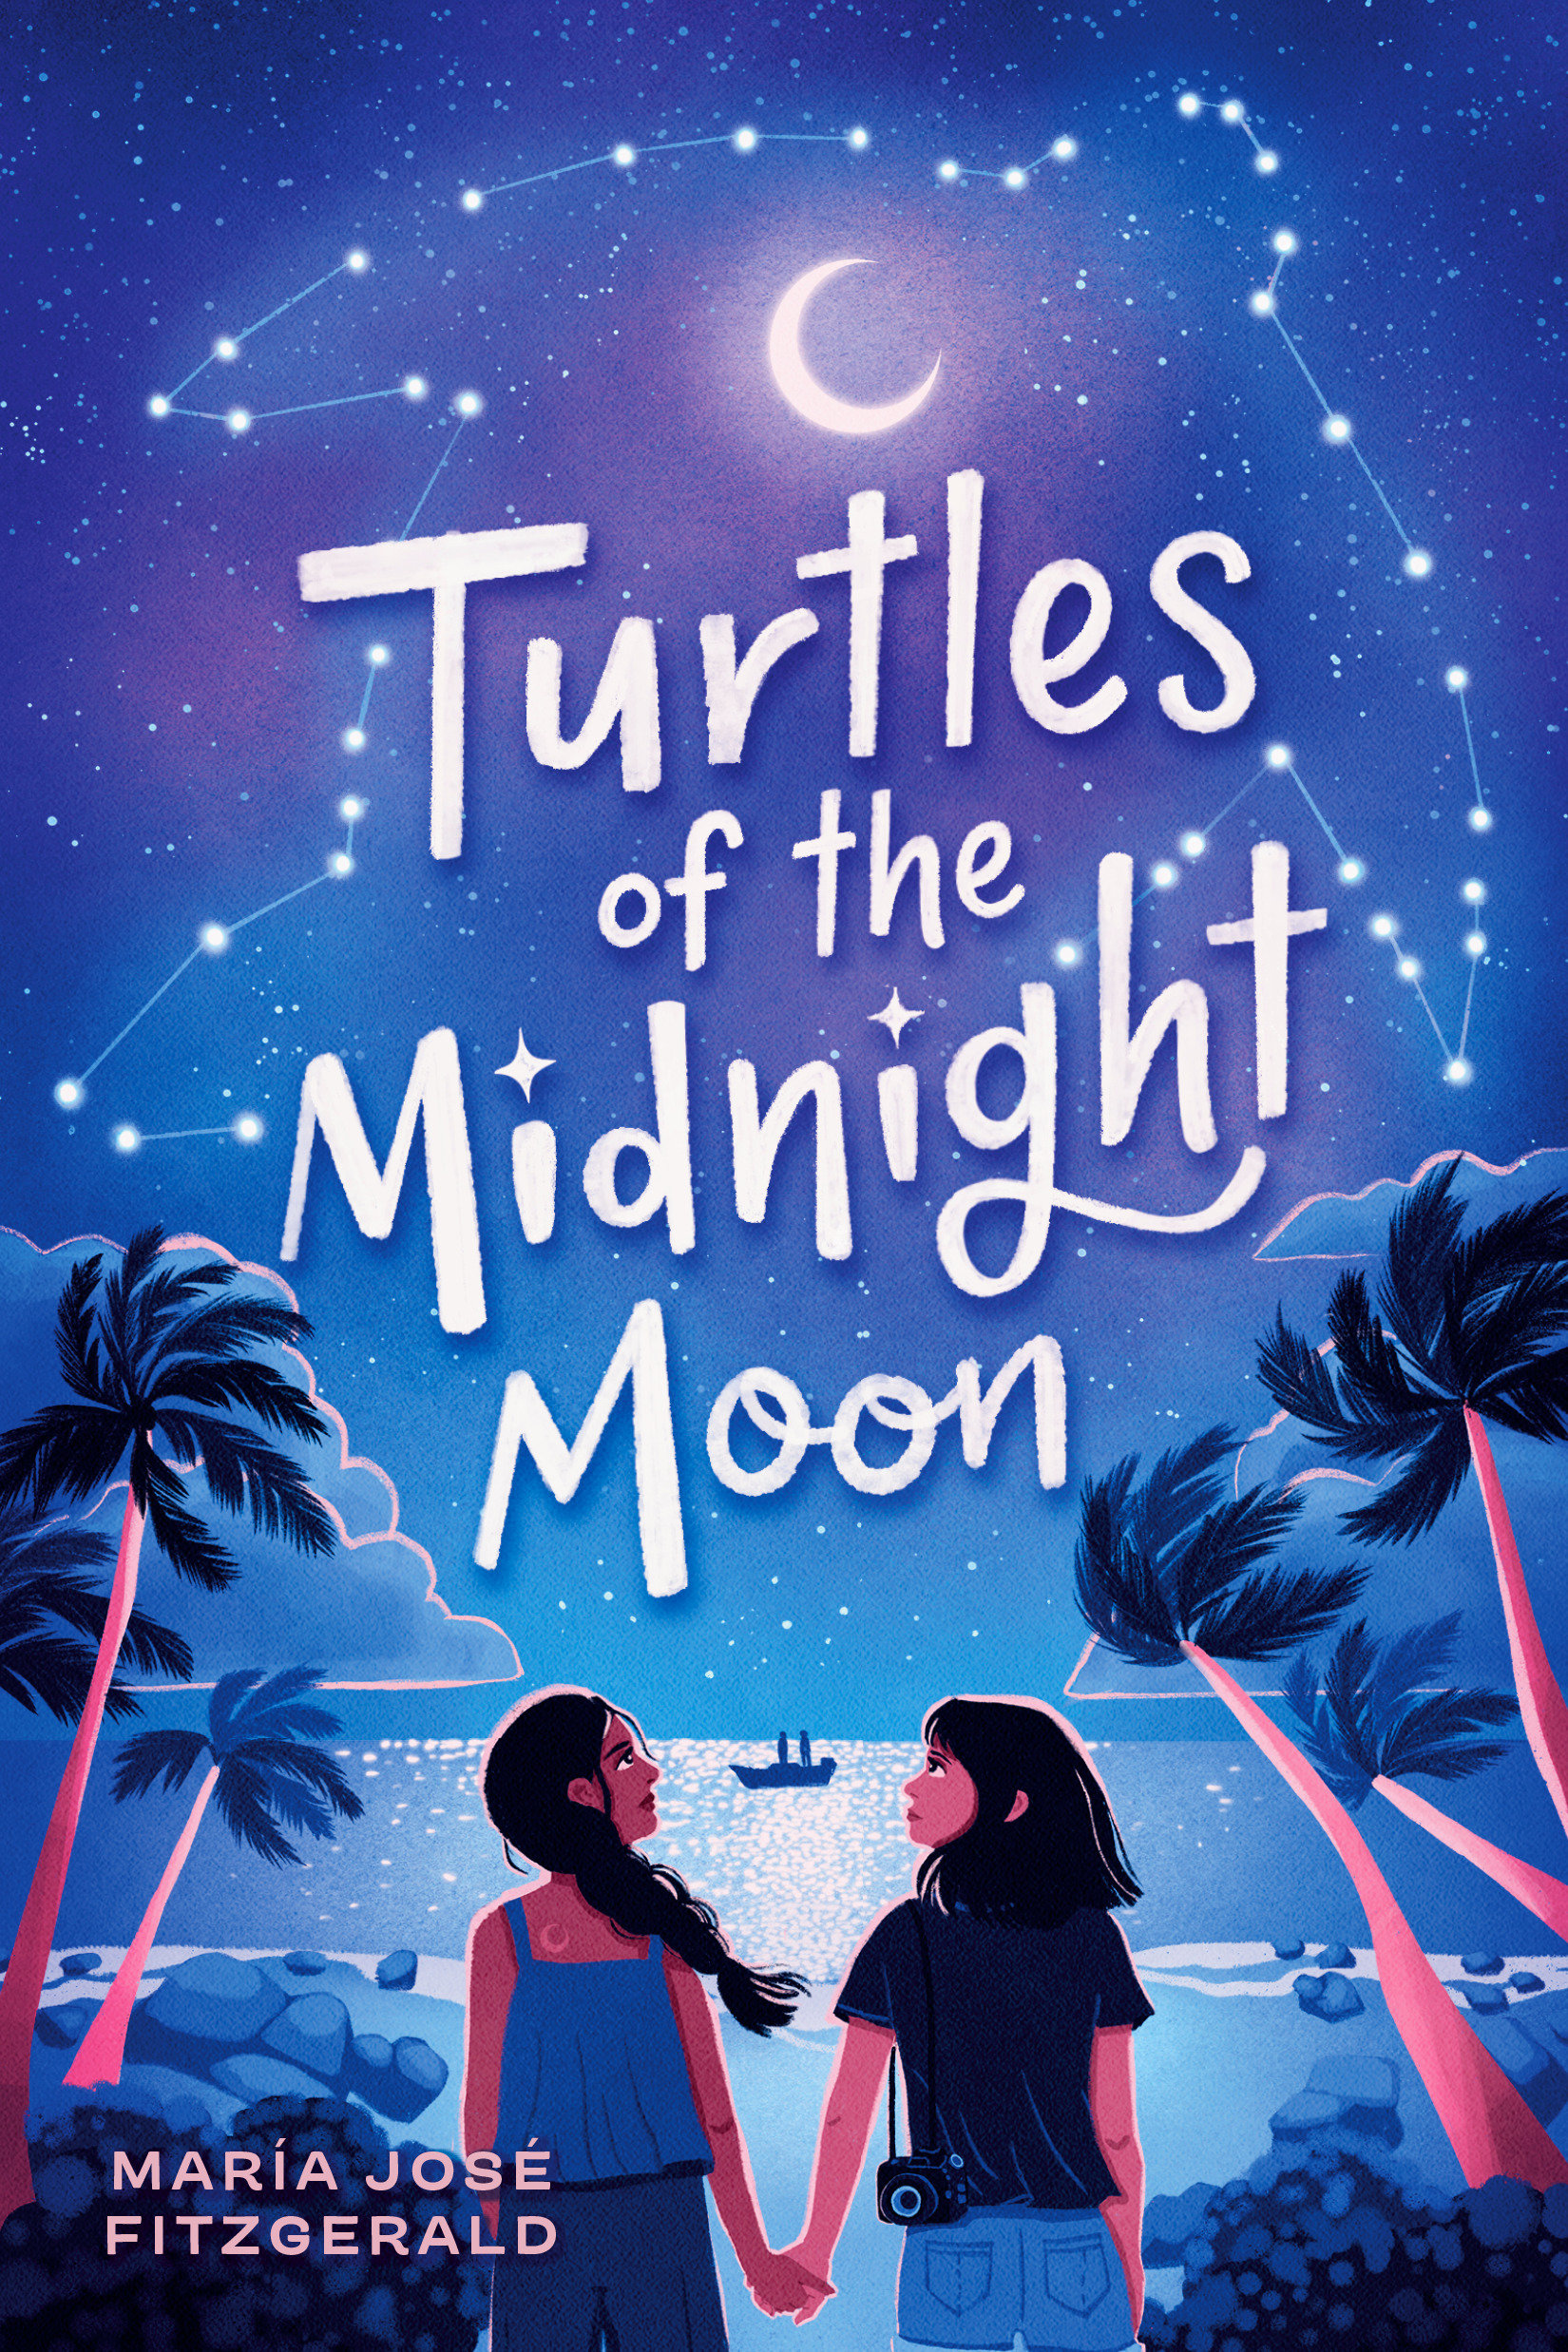 Turtles Of The Midnight Moon (Hardcover Book)